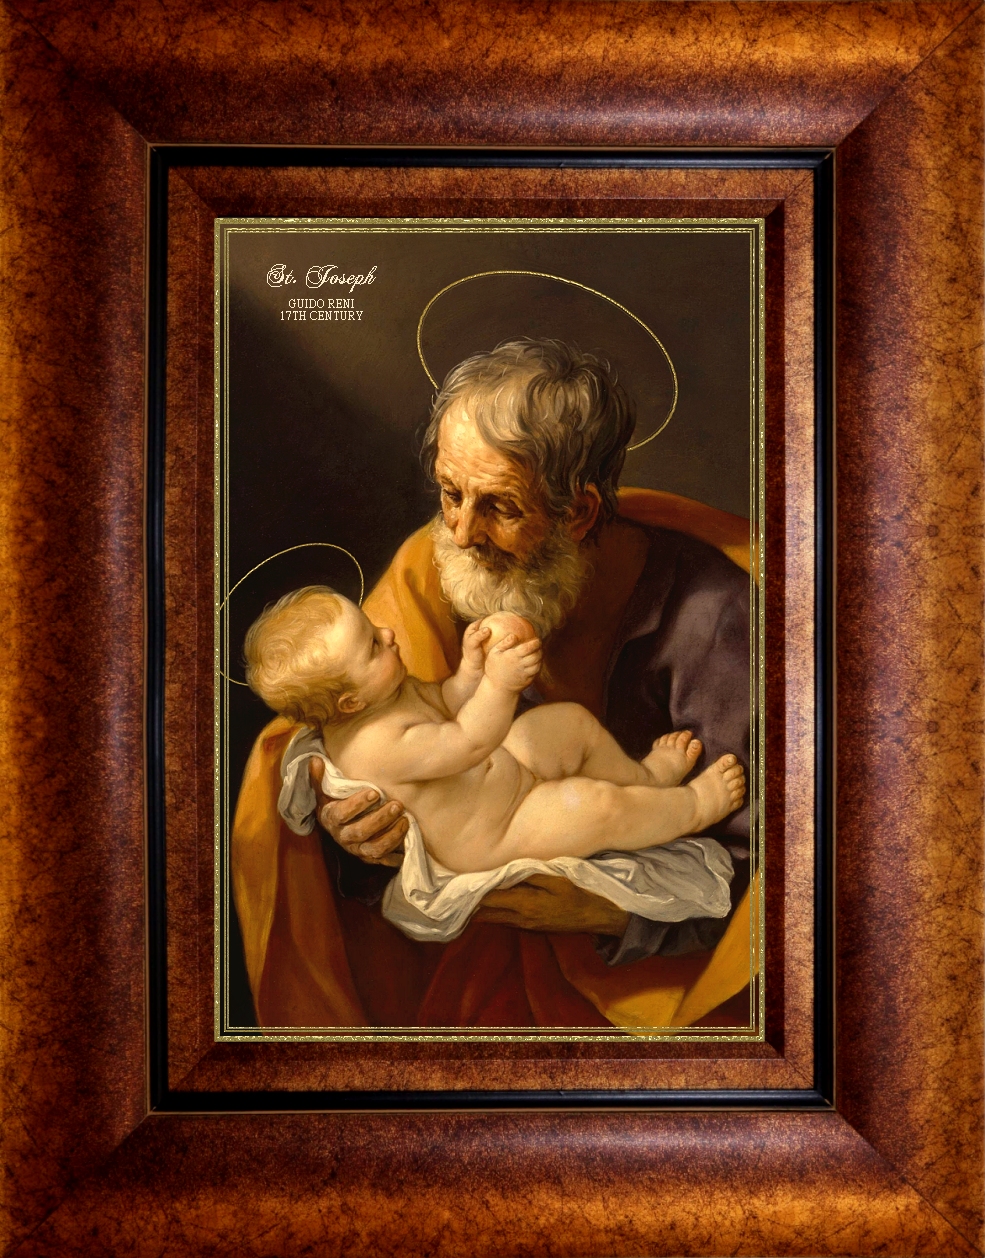 ST. JOSEPH BY GUIDO RENI IN WOODEN FRAME